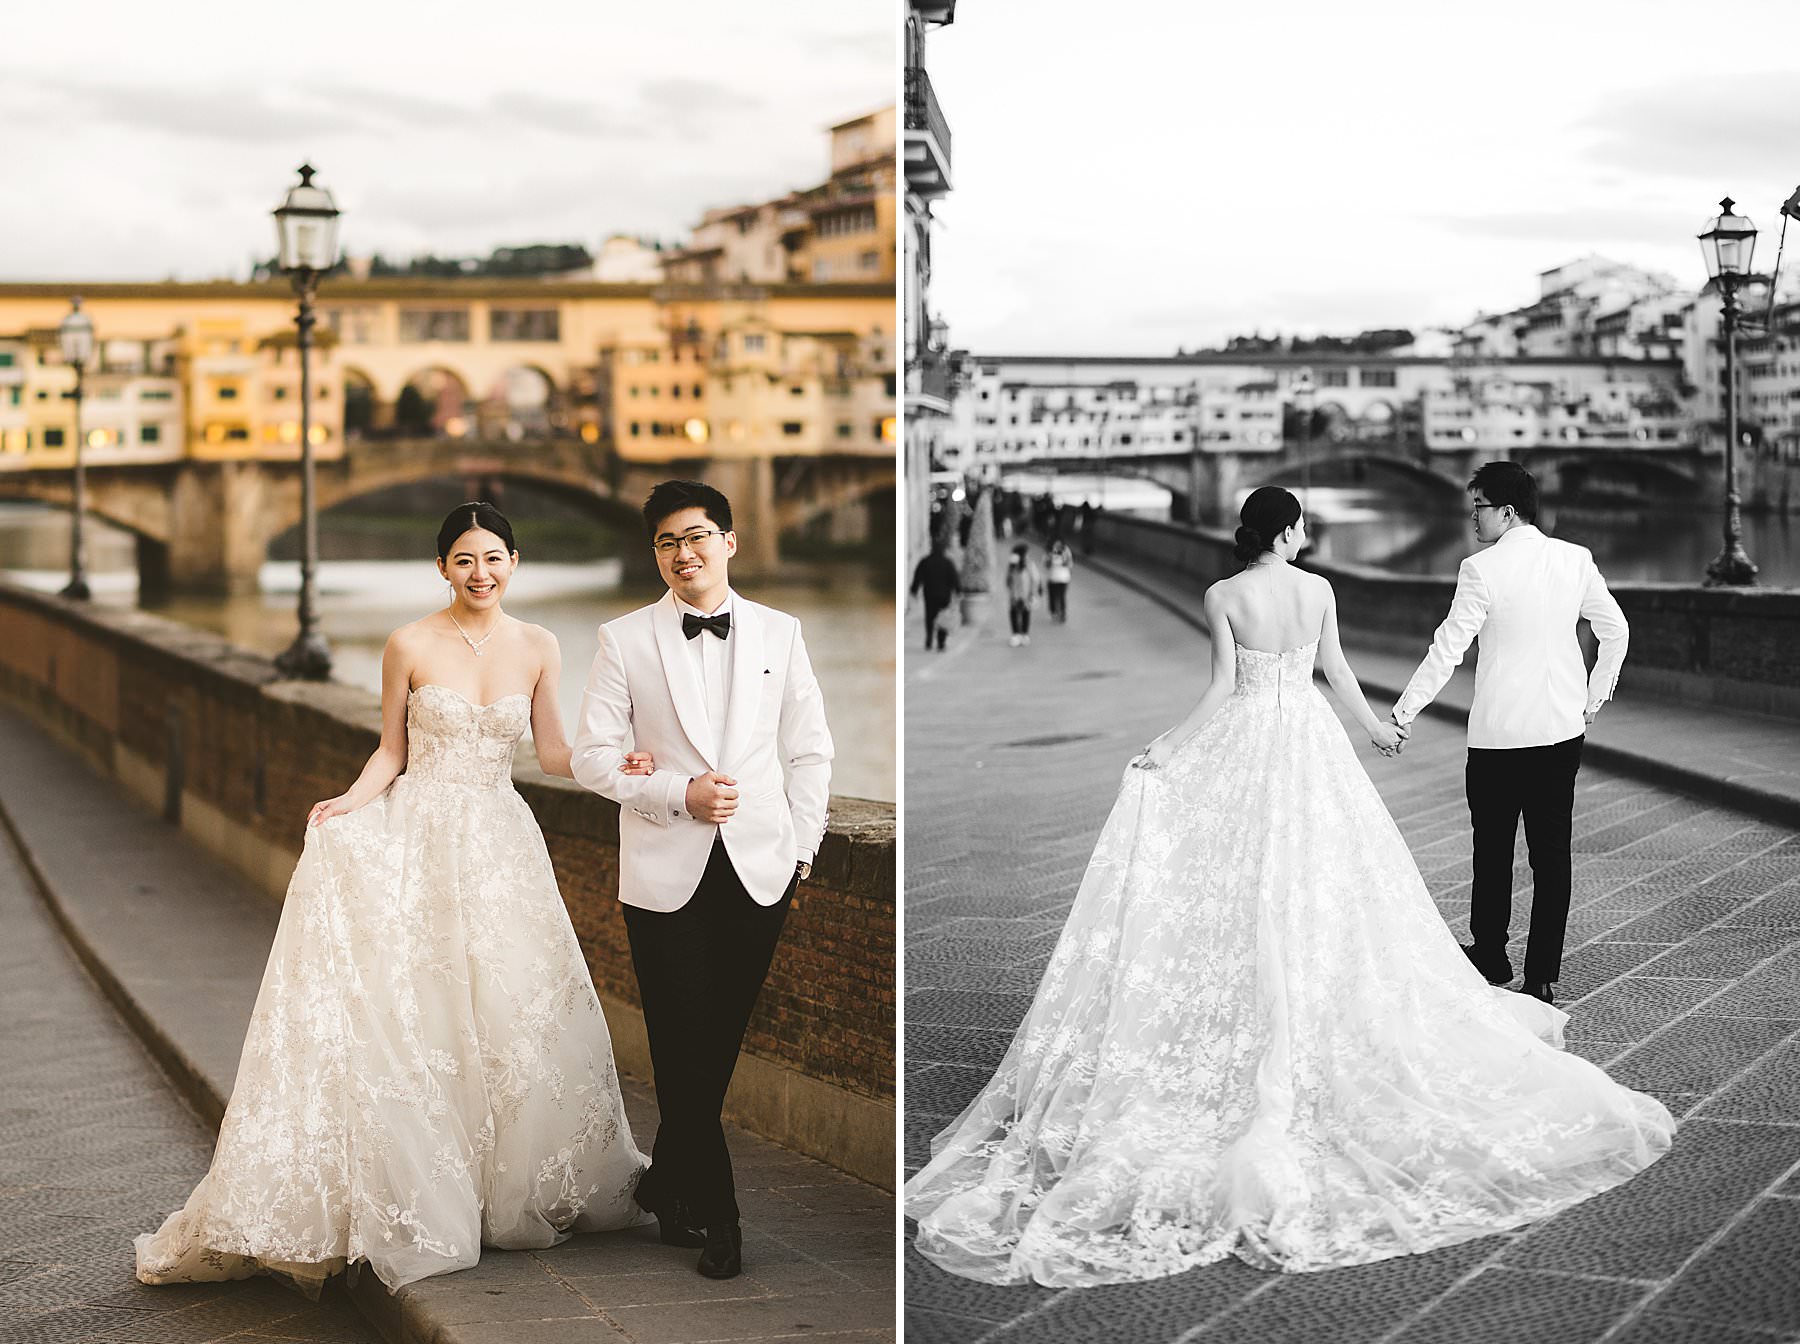 Lovely candid walk tour in the streets of Florence pre-wedding photo session near Ponte Vecchio